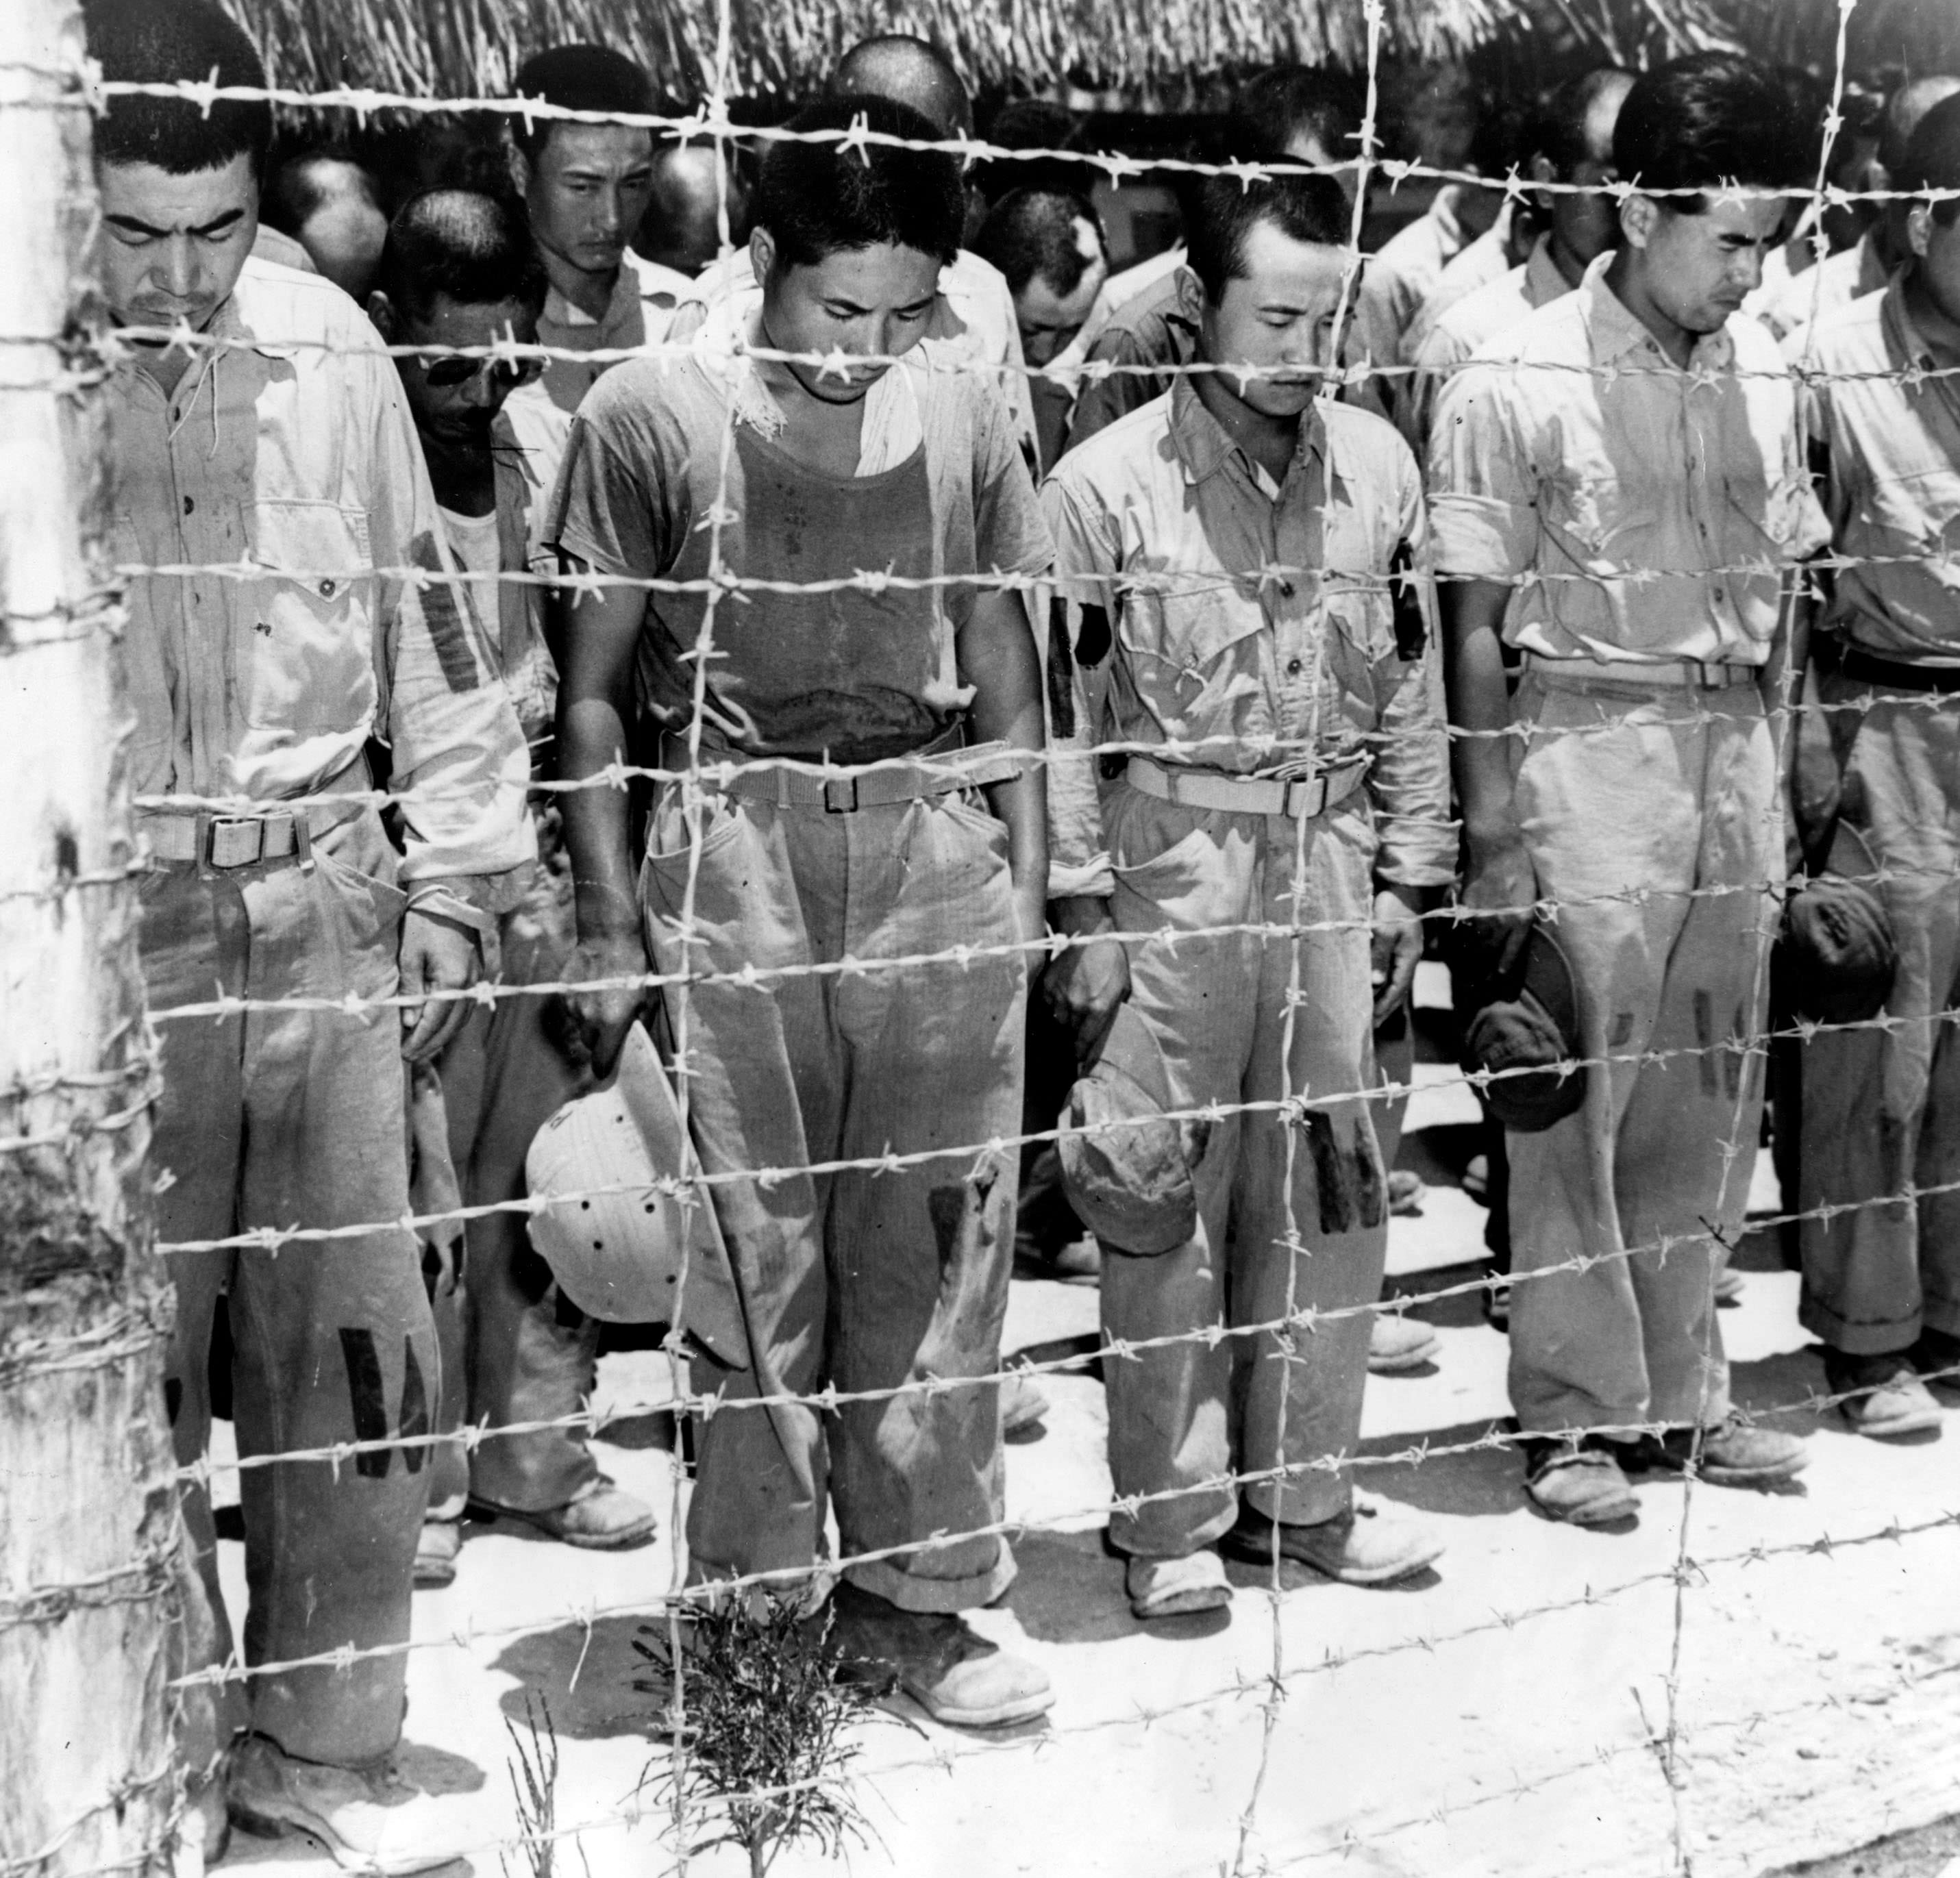 Japanese prisoners of war on Guam bow their heads as they listen to a radio broadcast of Emperor Hirohito announcing Japan's unconditional surrender in 1945. As the war came closer to an end, more and more Japanese soldiers actually did surrender rather than kill themselves or try suicidal attacks. It even got to a point where dropping the atomic bomb was questioned whether it was even necessary after how quickly Japan lost Manchuria when the Soviets began their advance in Asia. Its a debate historians still argue today as each side has valid points for the dropping and against it.